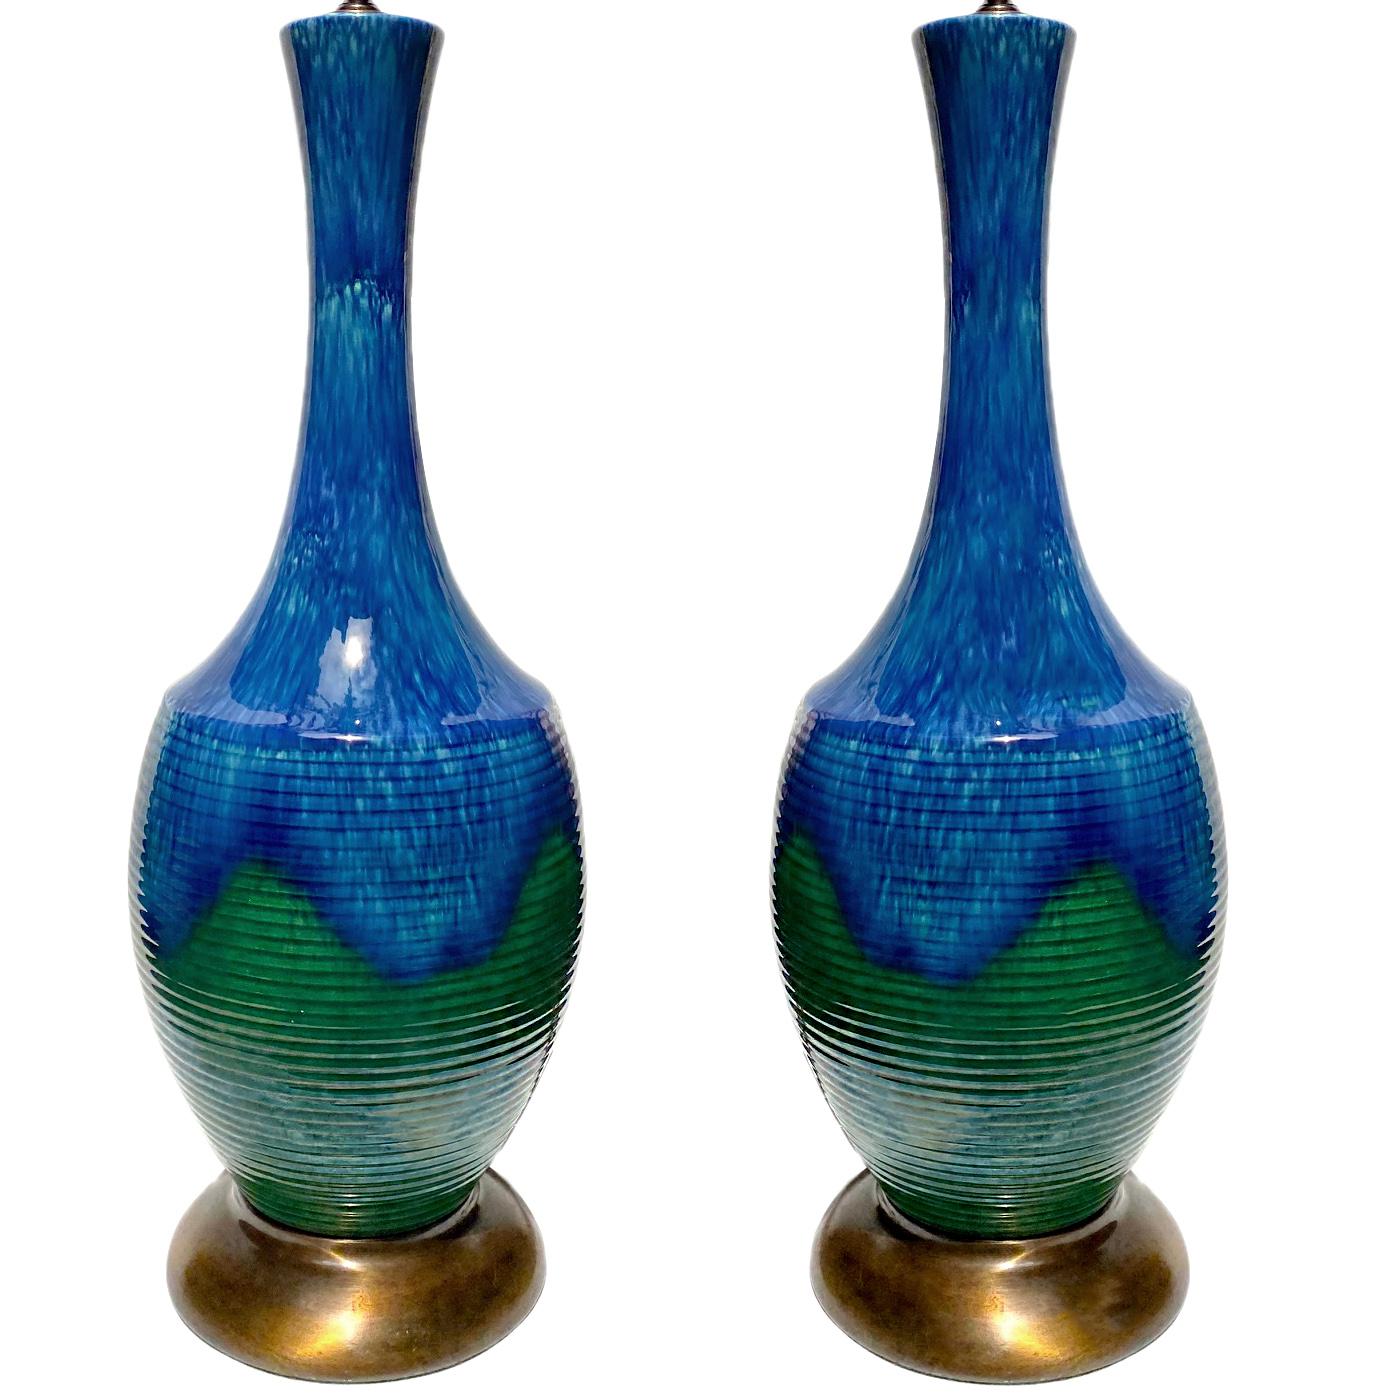 Pair of circa 1950's Italian two-tone glazed porcelain table lamps with blue and green hues.

Measurements:
Height of body: 24.5